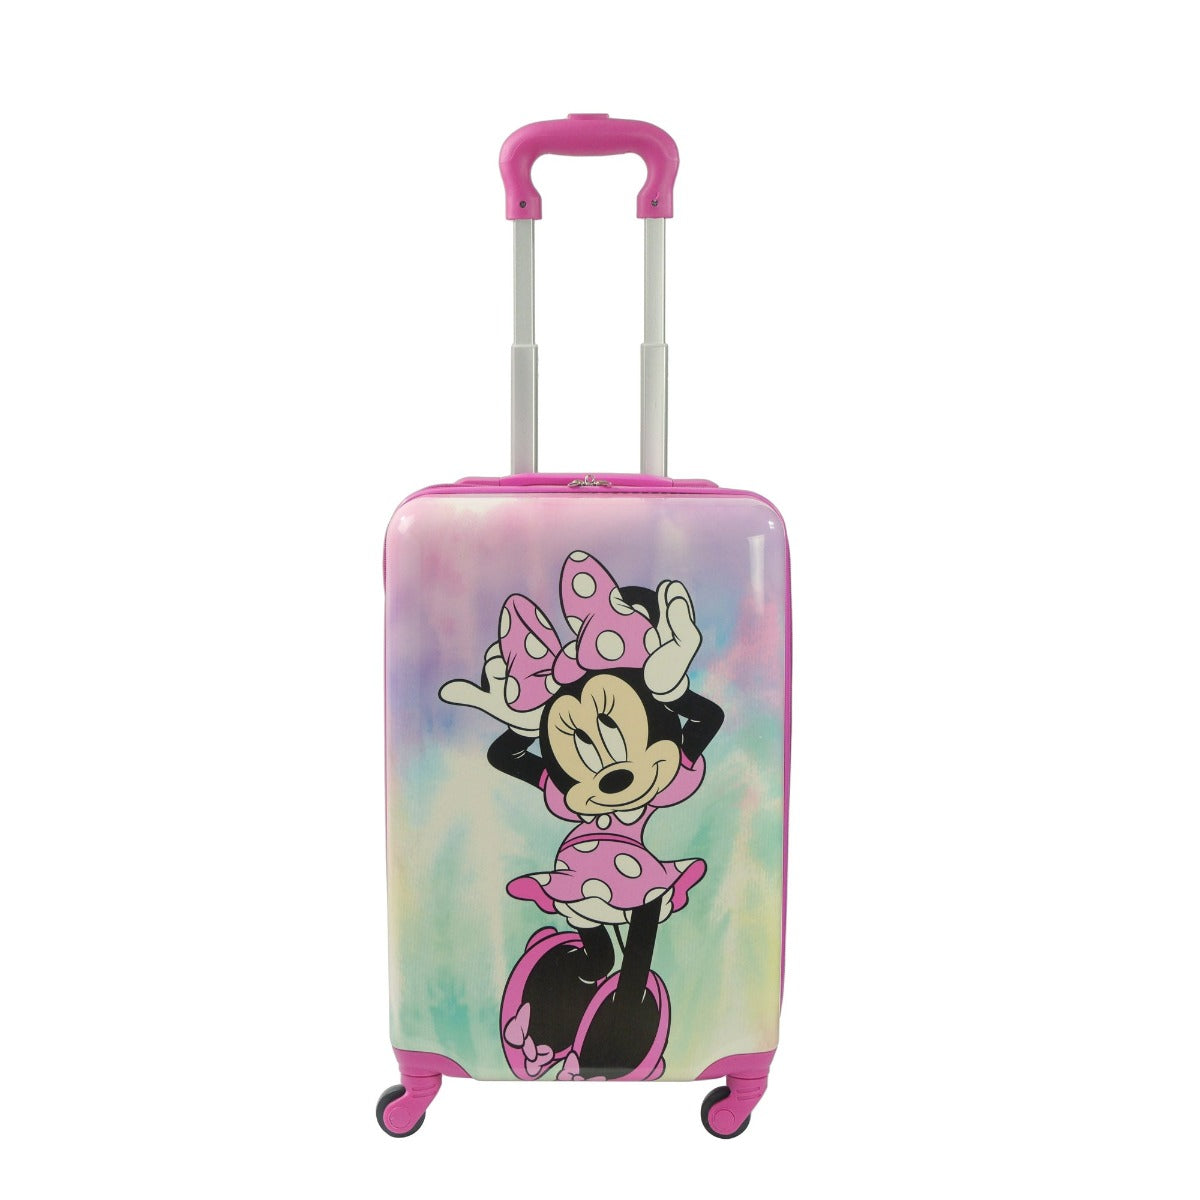 Ful Disney minnie mouse pastel 21" hardside spinner luggage - best kids suitcase for travel